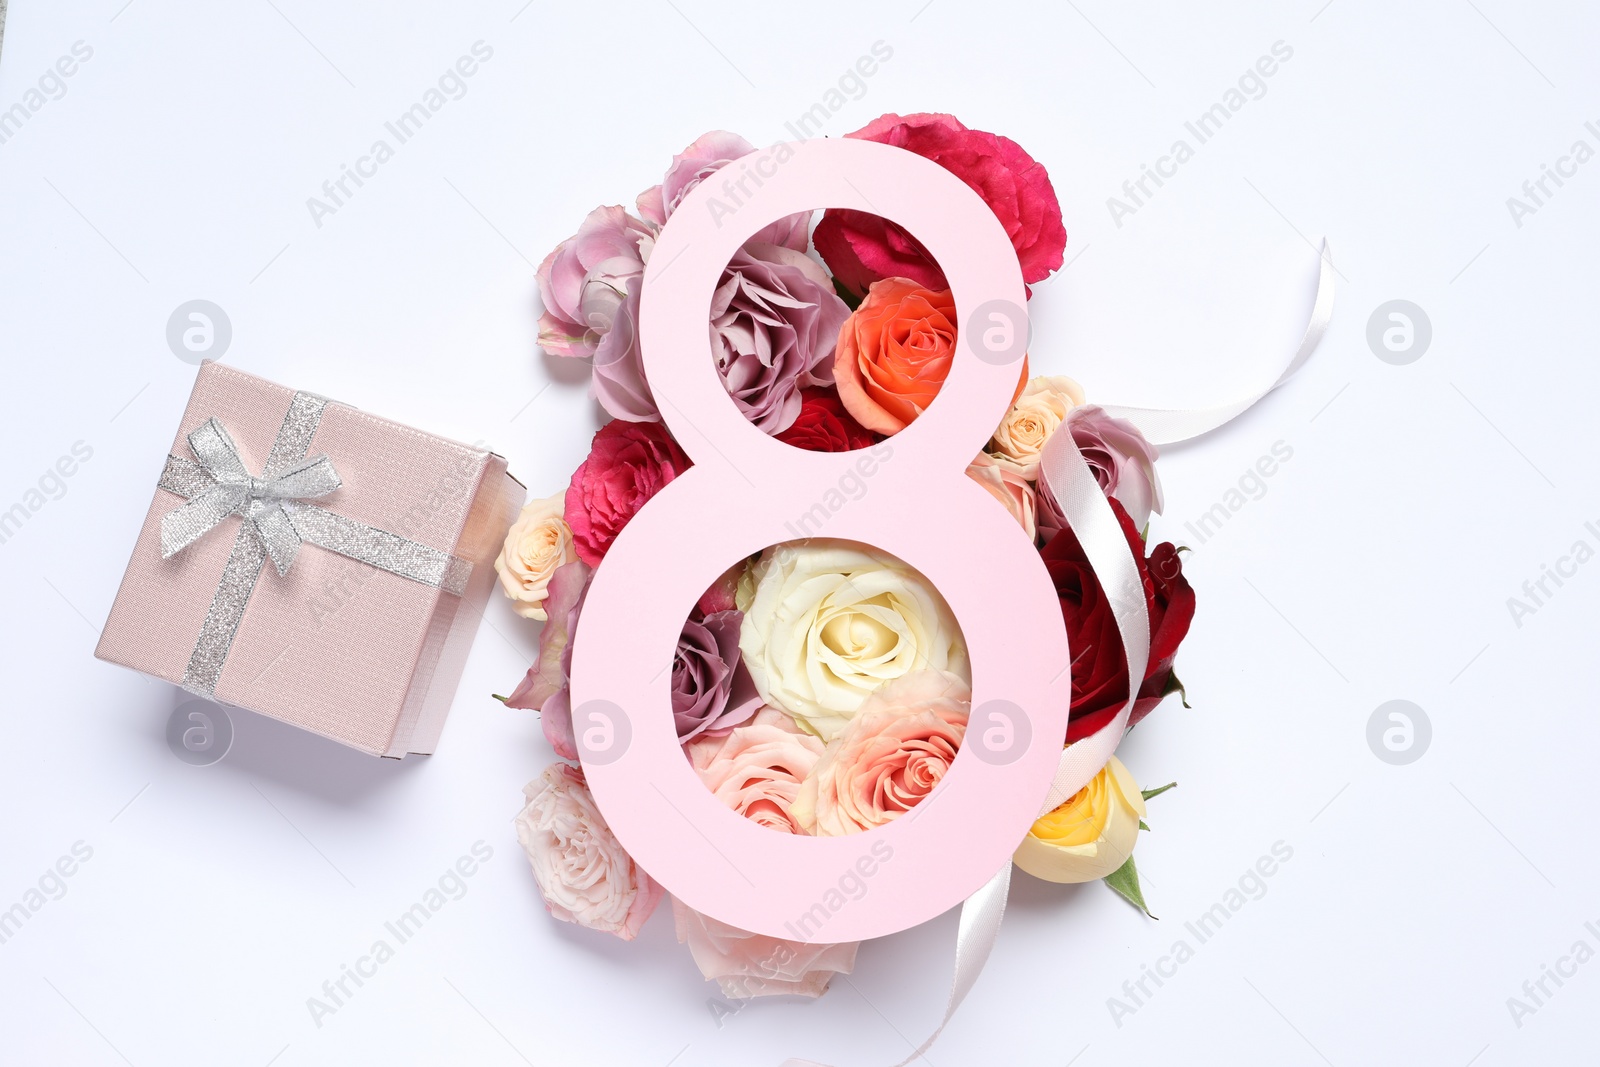 Photo of 8 March greeting card design with roses and gift box on white background, top view. Happy International Women's Day